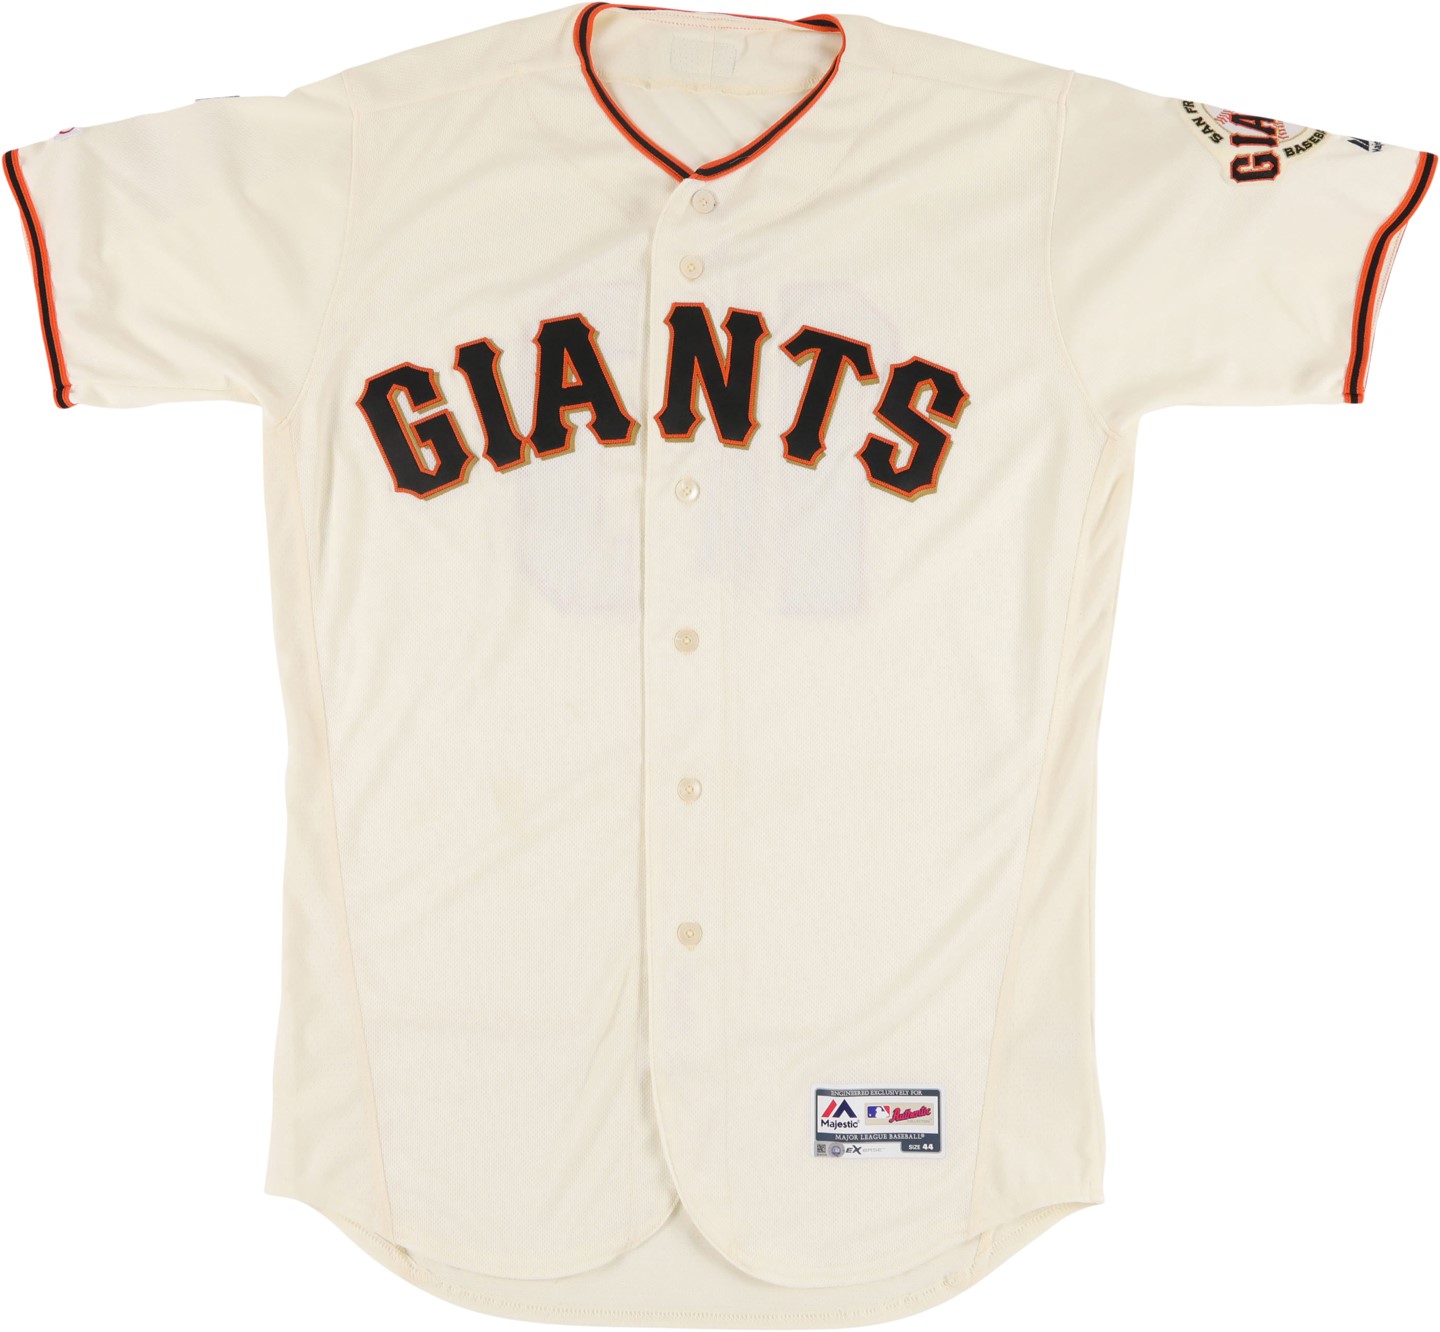 Baseball Equipment - 5/1/19 Evan Longoria San Francisco Giants Signed Game Worn Jersey with Four Patches (MLB Holo & Photo-Matched)